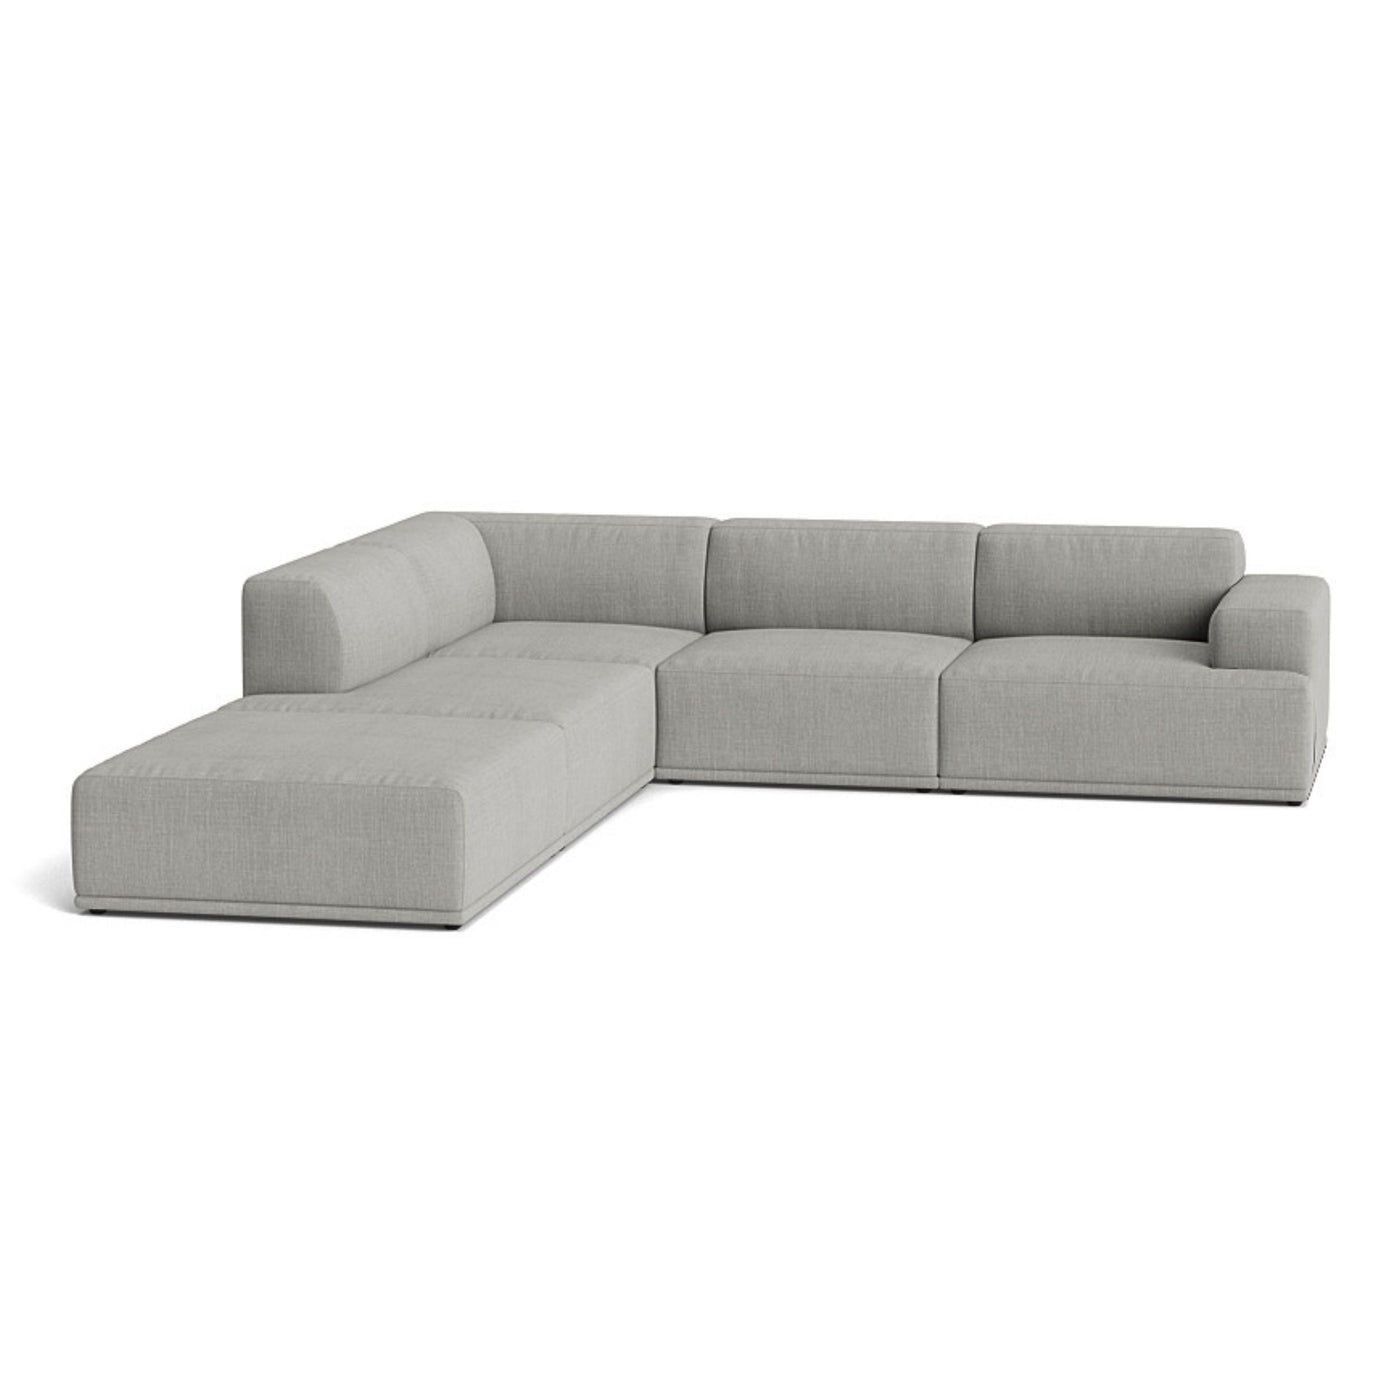 Muuto Connect Soft Modular Corner Sofa, configuration 1. Made-to-order from someday designs. #colour_remix-133